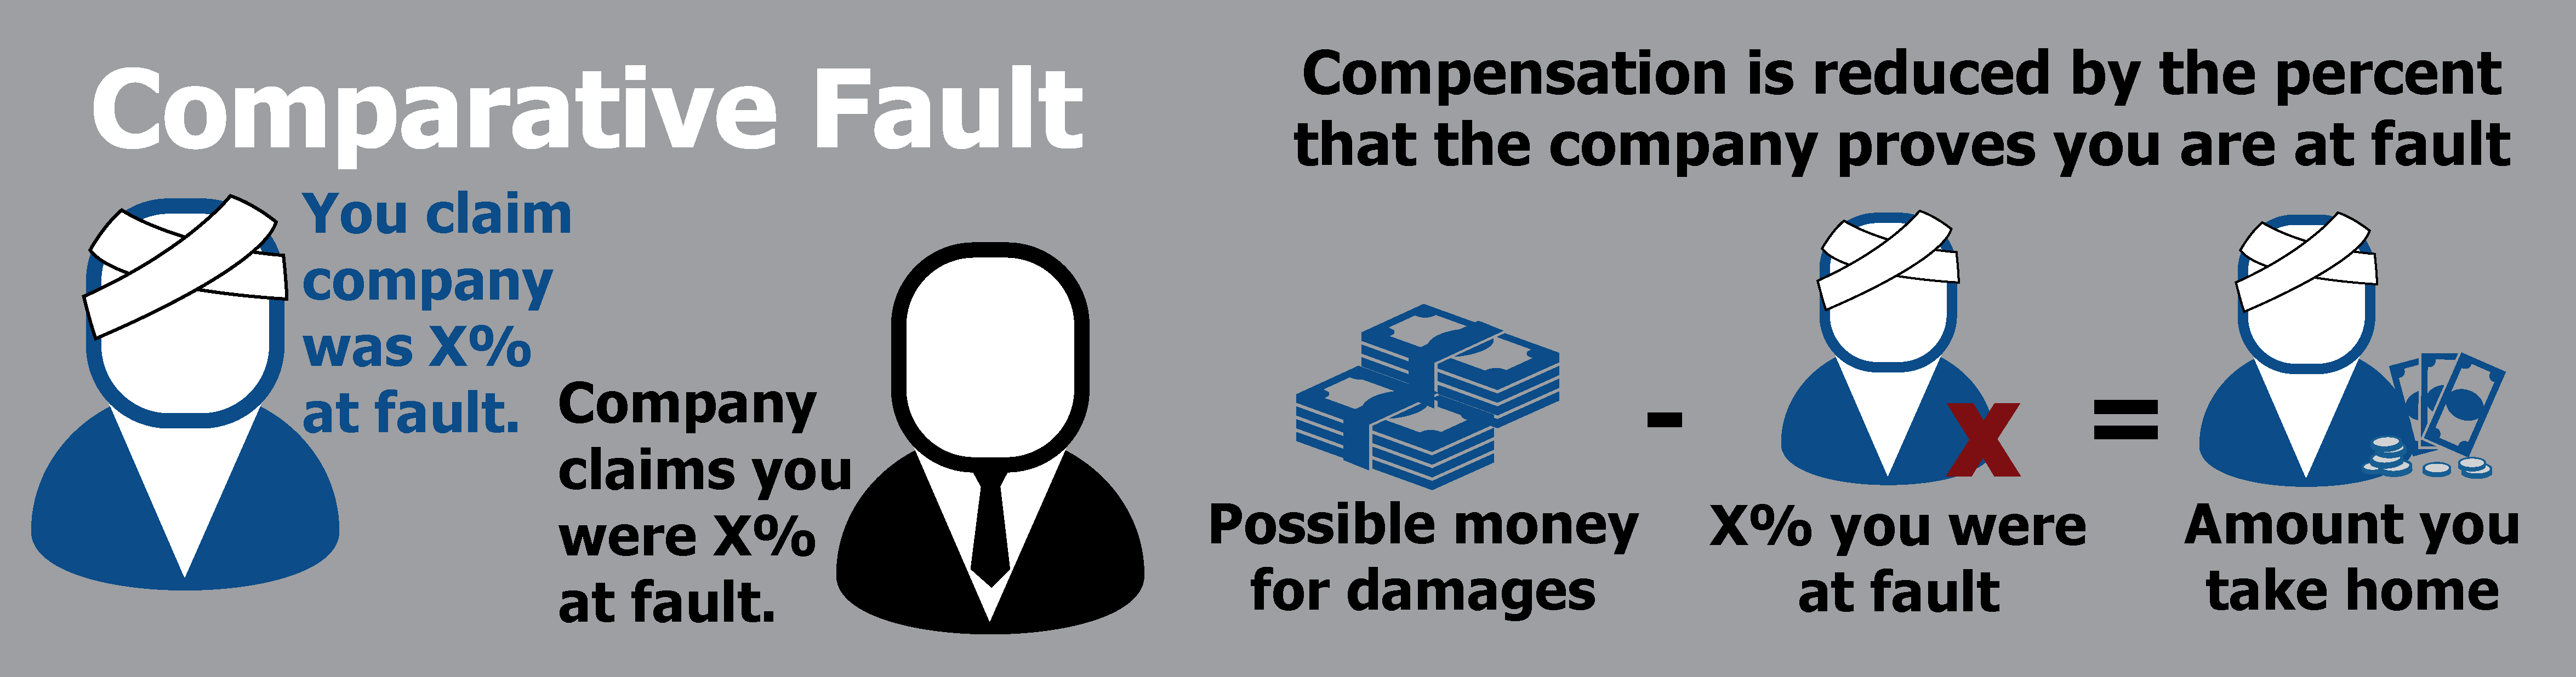 comparative fault infographic banner-04